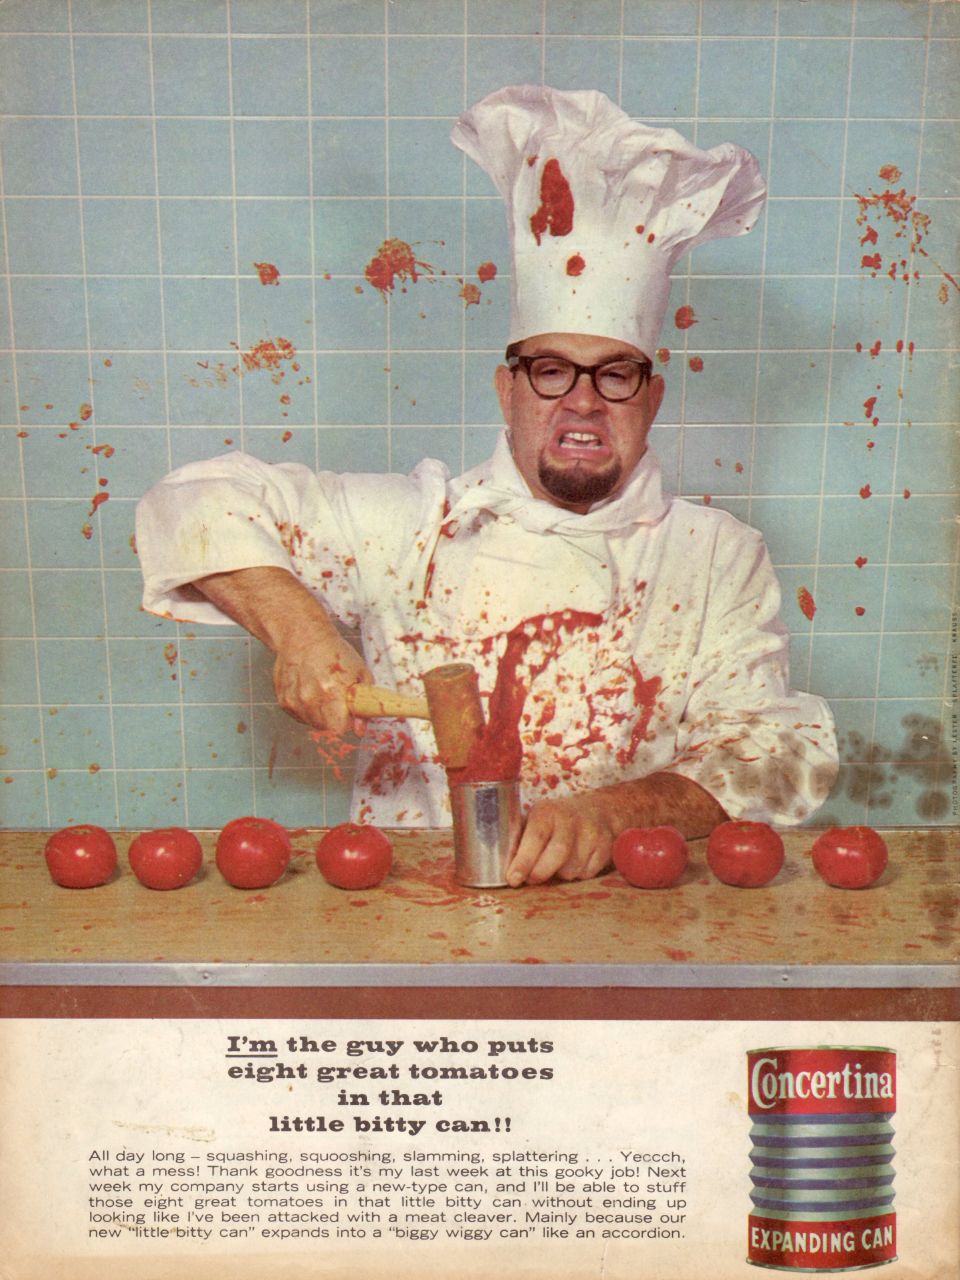 brandflakesforbreakfast: mad magazine spoof ads from the 50's to the 70's